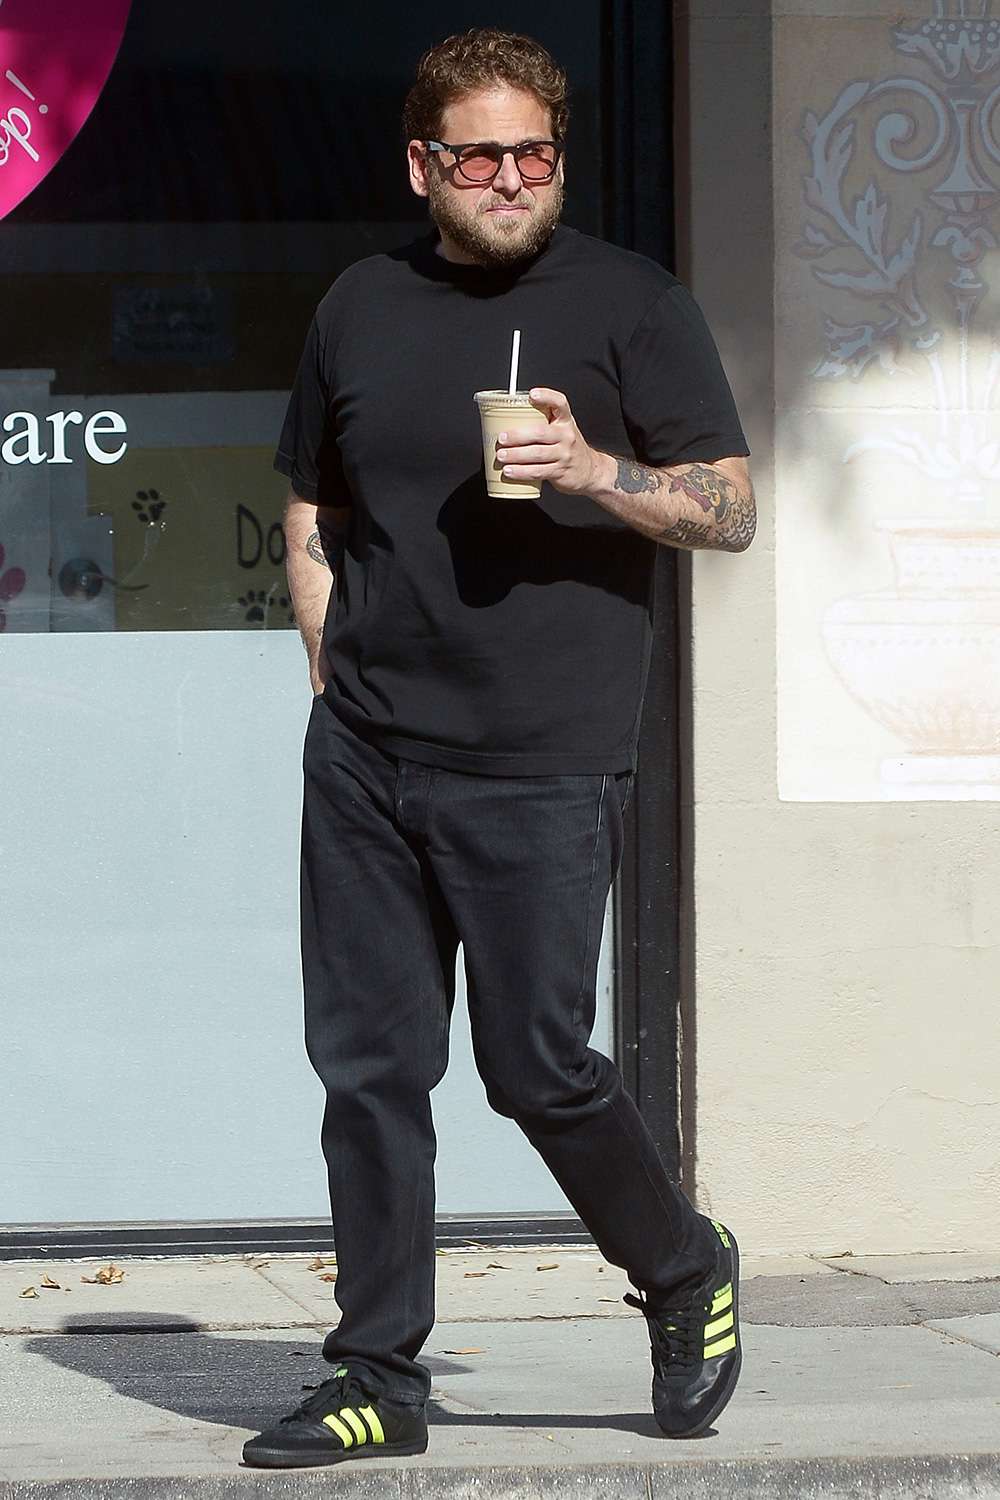 Jonah Hill shows off a leaner figure while out on a coffee run in Los Angeles